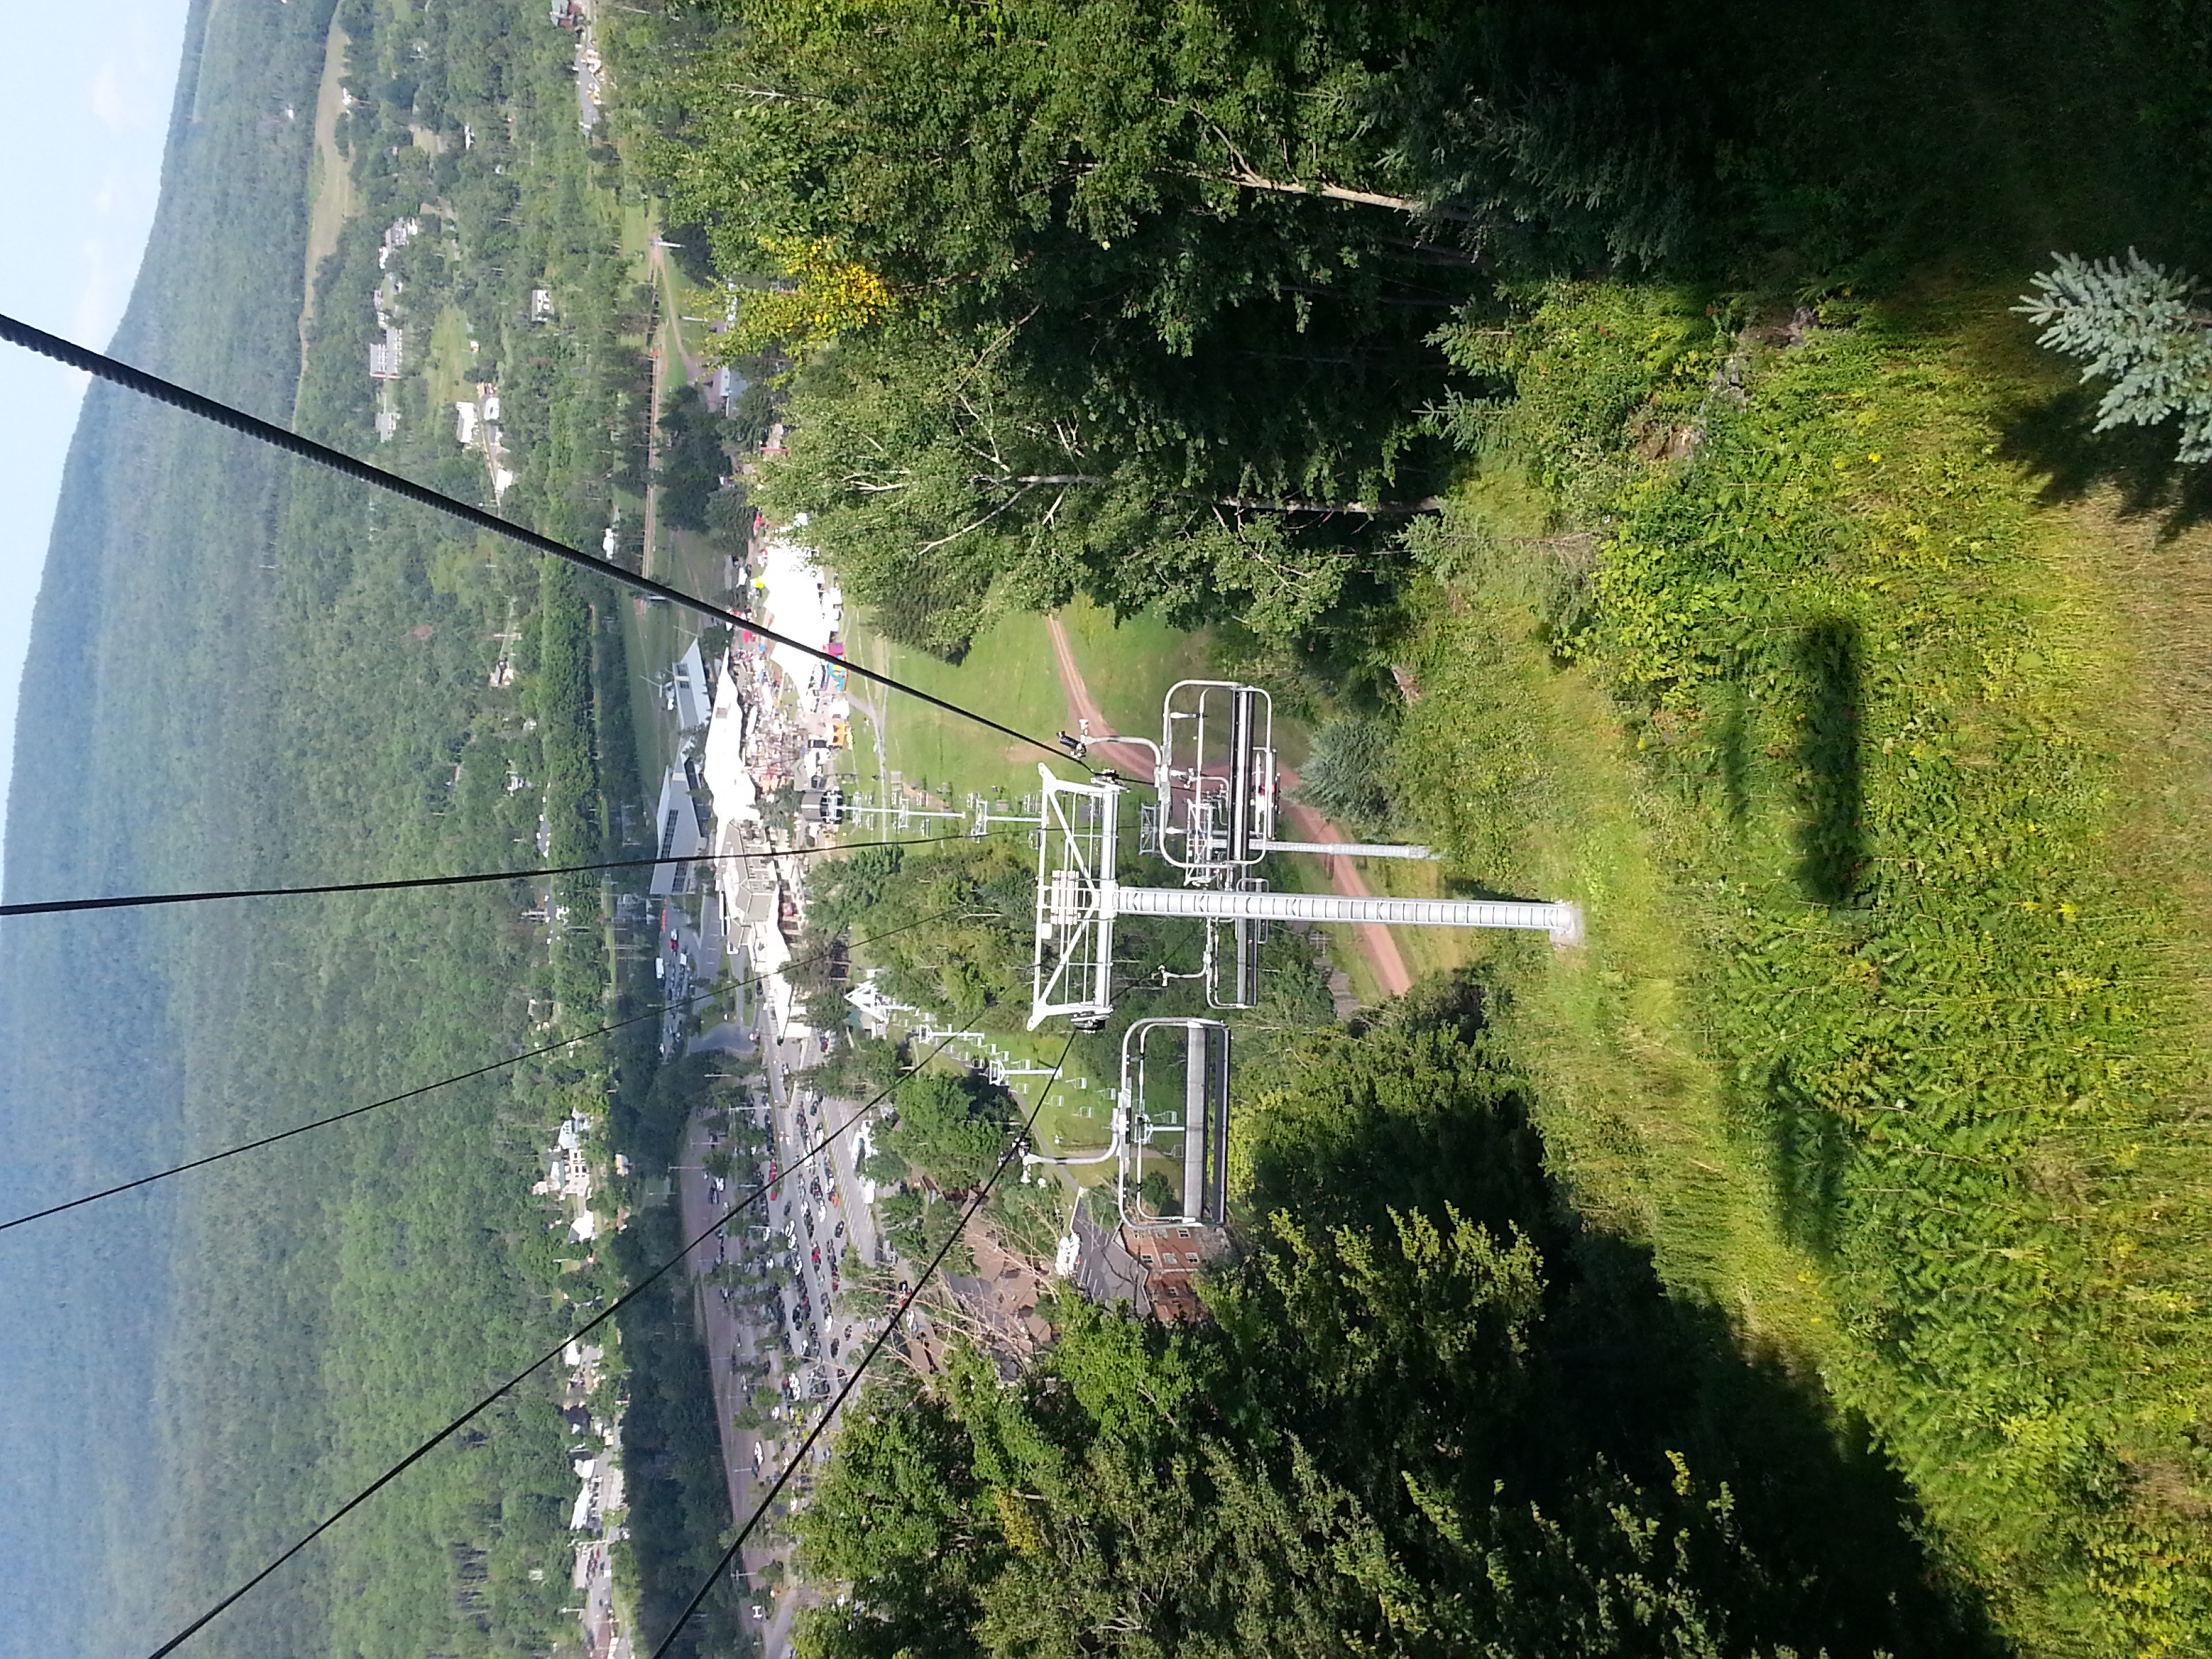 View from the Chairlift